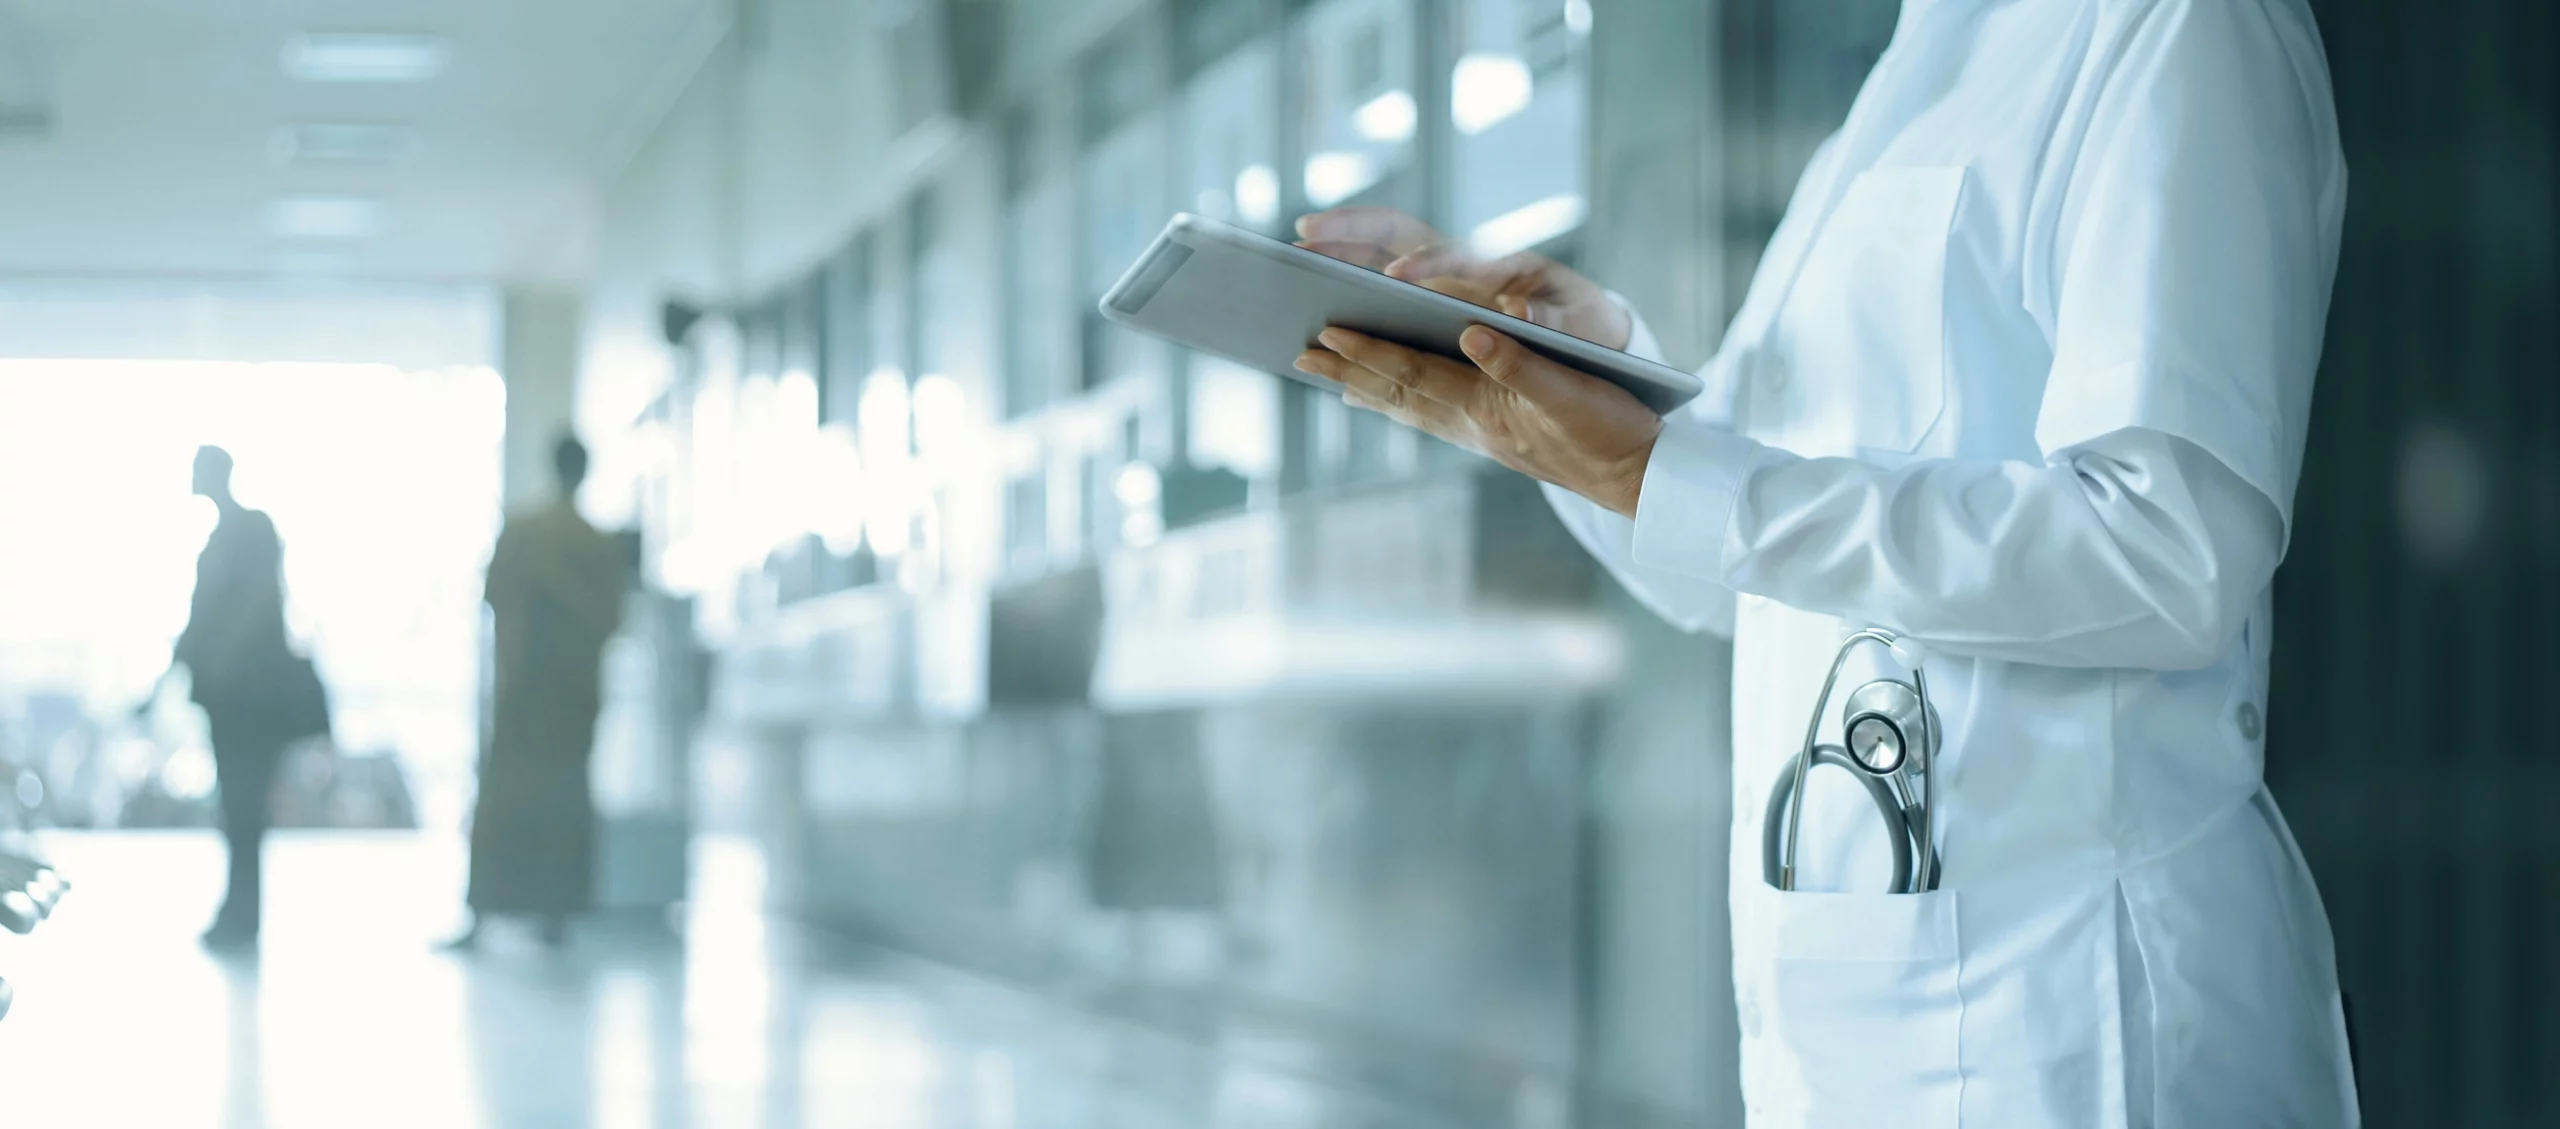 A physician checks patient information on their tablet while standing in the hallway of a hospital.